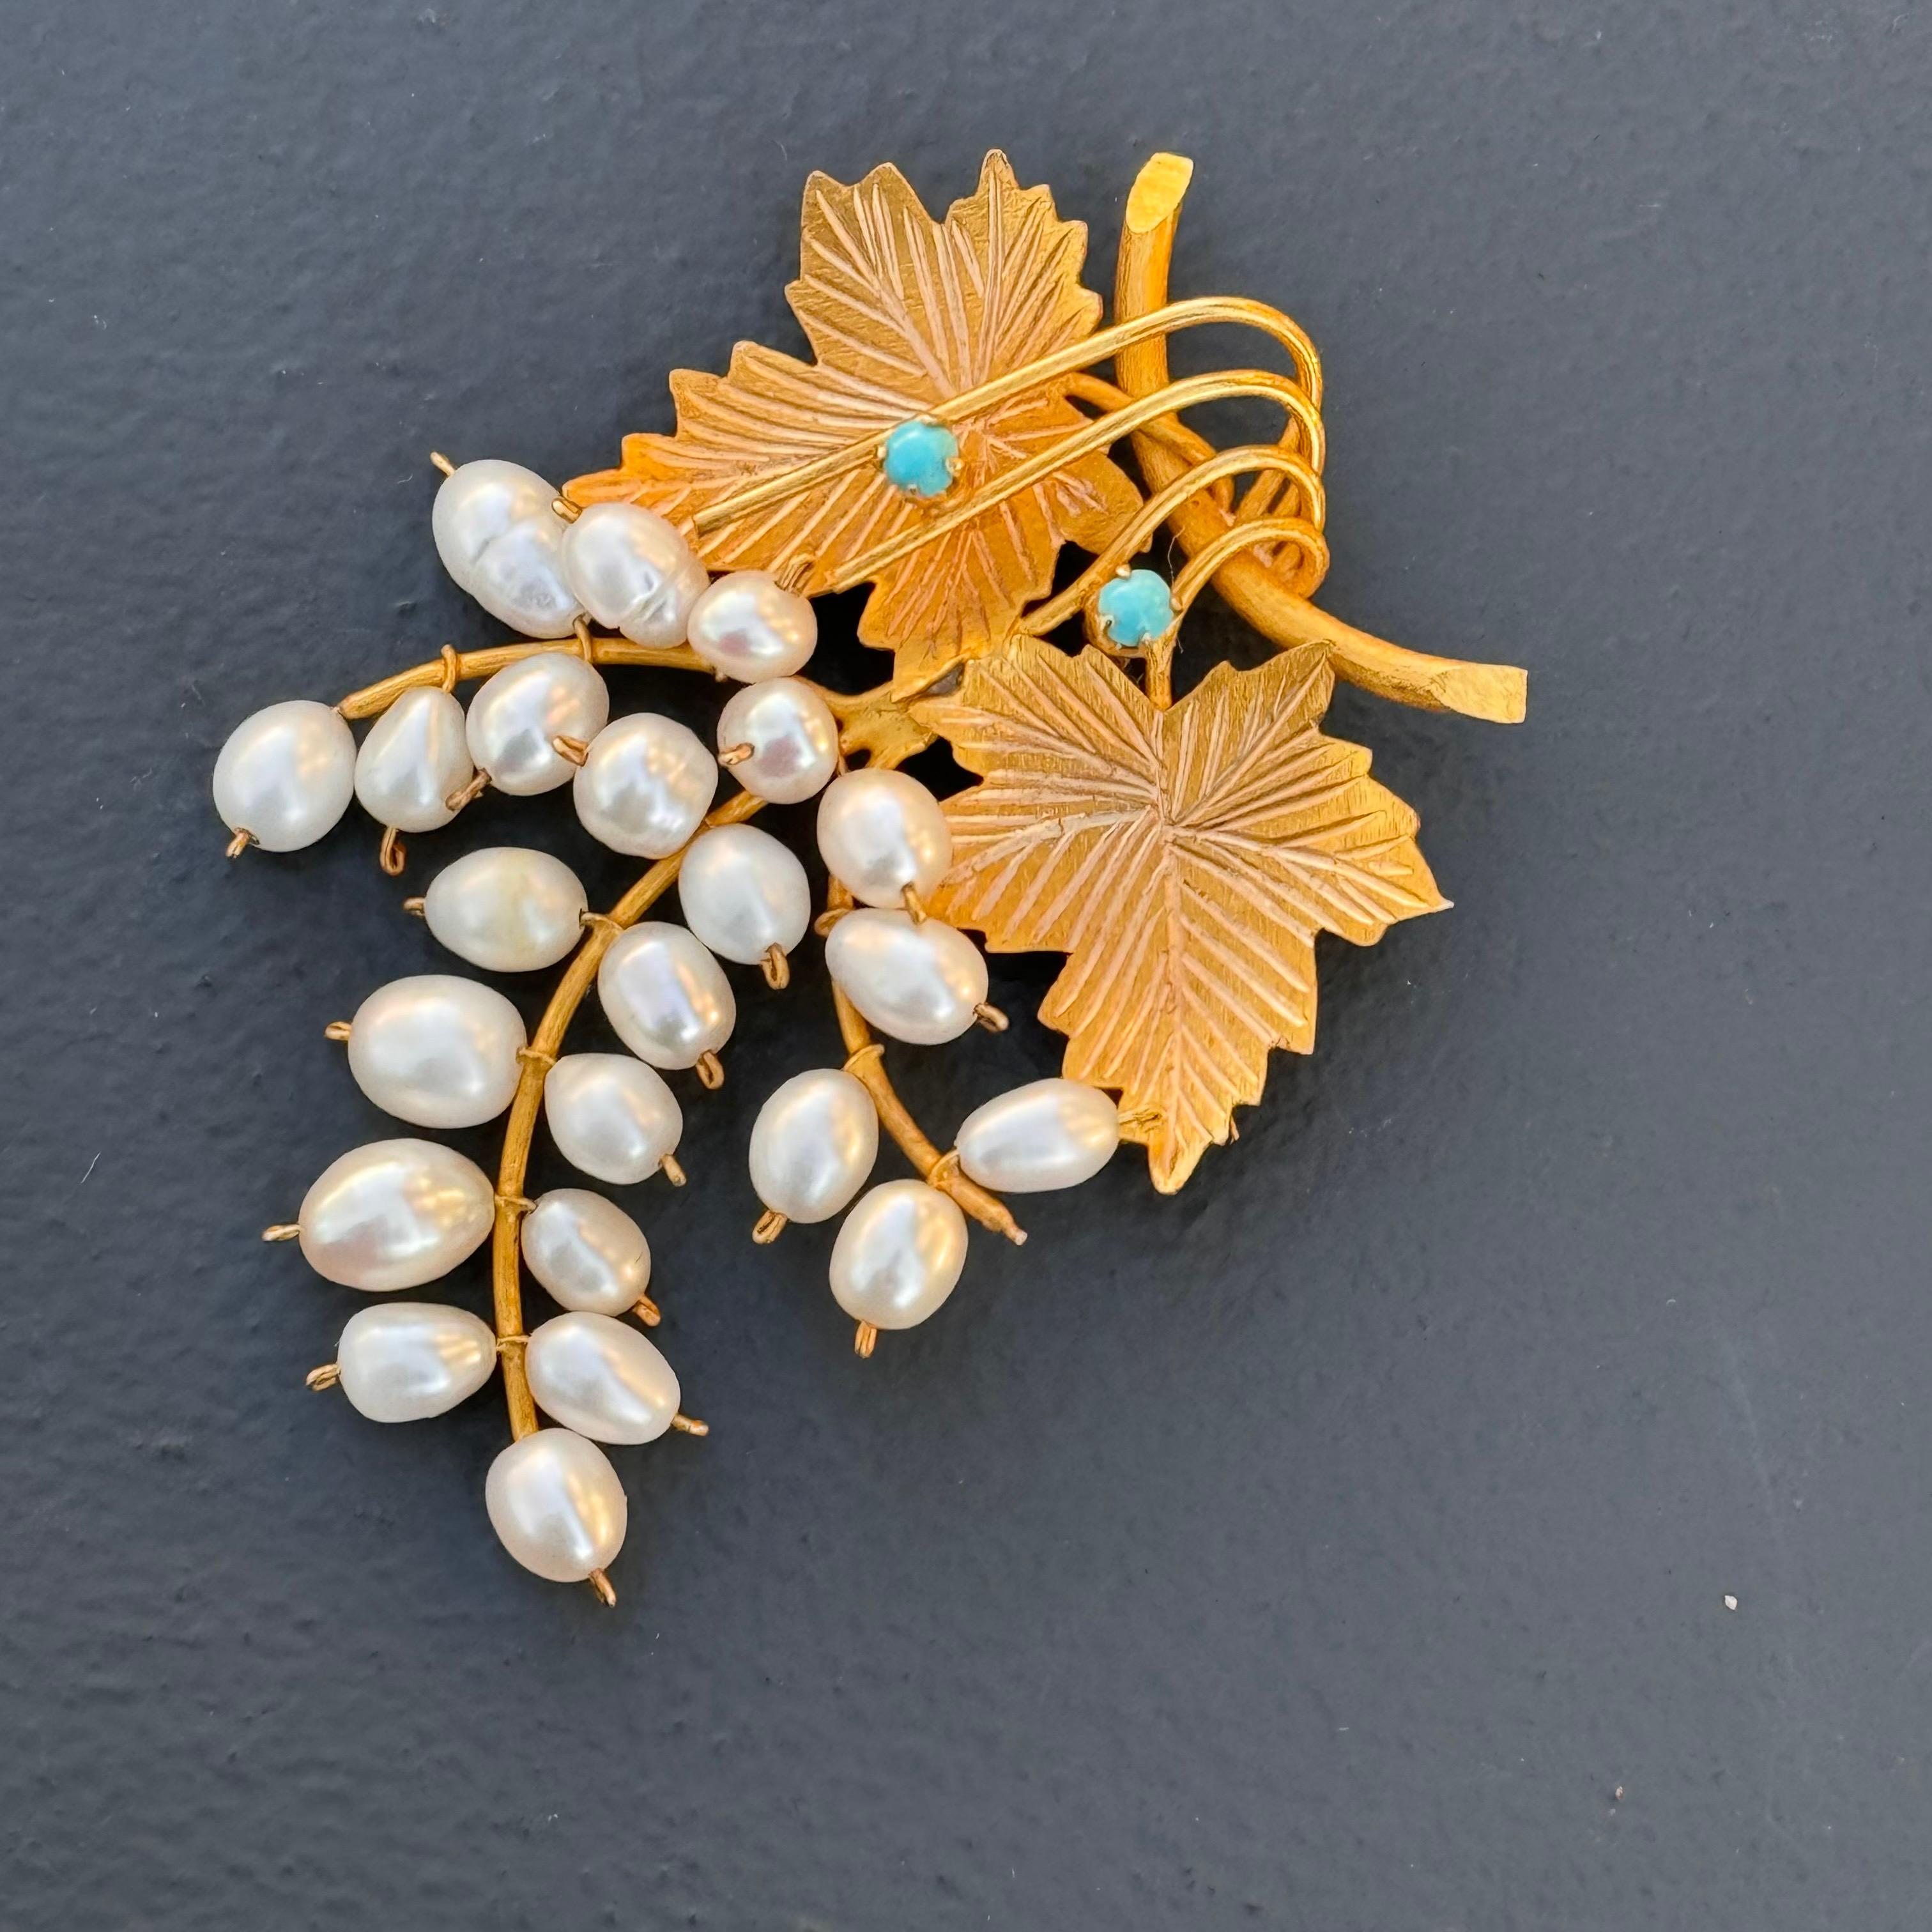 Absolutely stunning vintage Victorian revival  18kt solid yellow gold   Grape cluster pin brooch with cultured pearls .
Pin looks to be Very well  handmade , even leaves have detailed texture on front side and most likely made in Italy .
Back has 